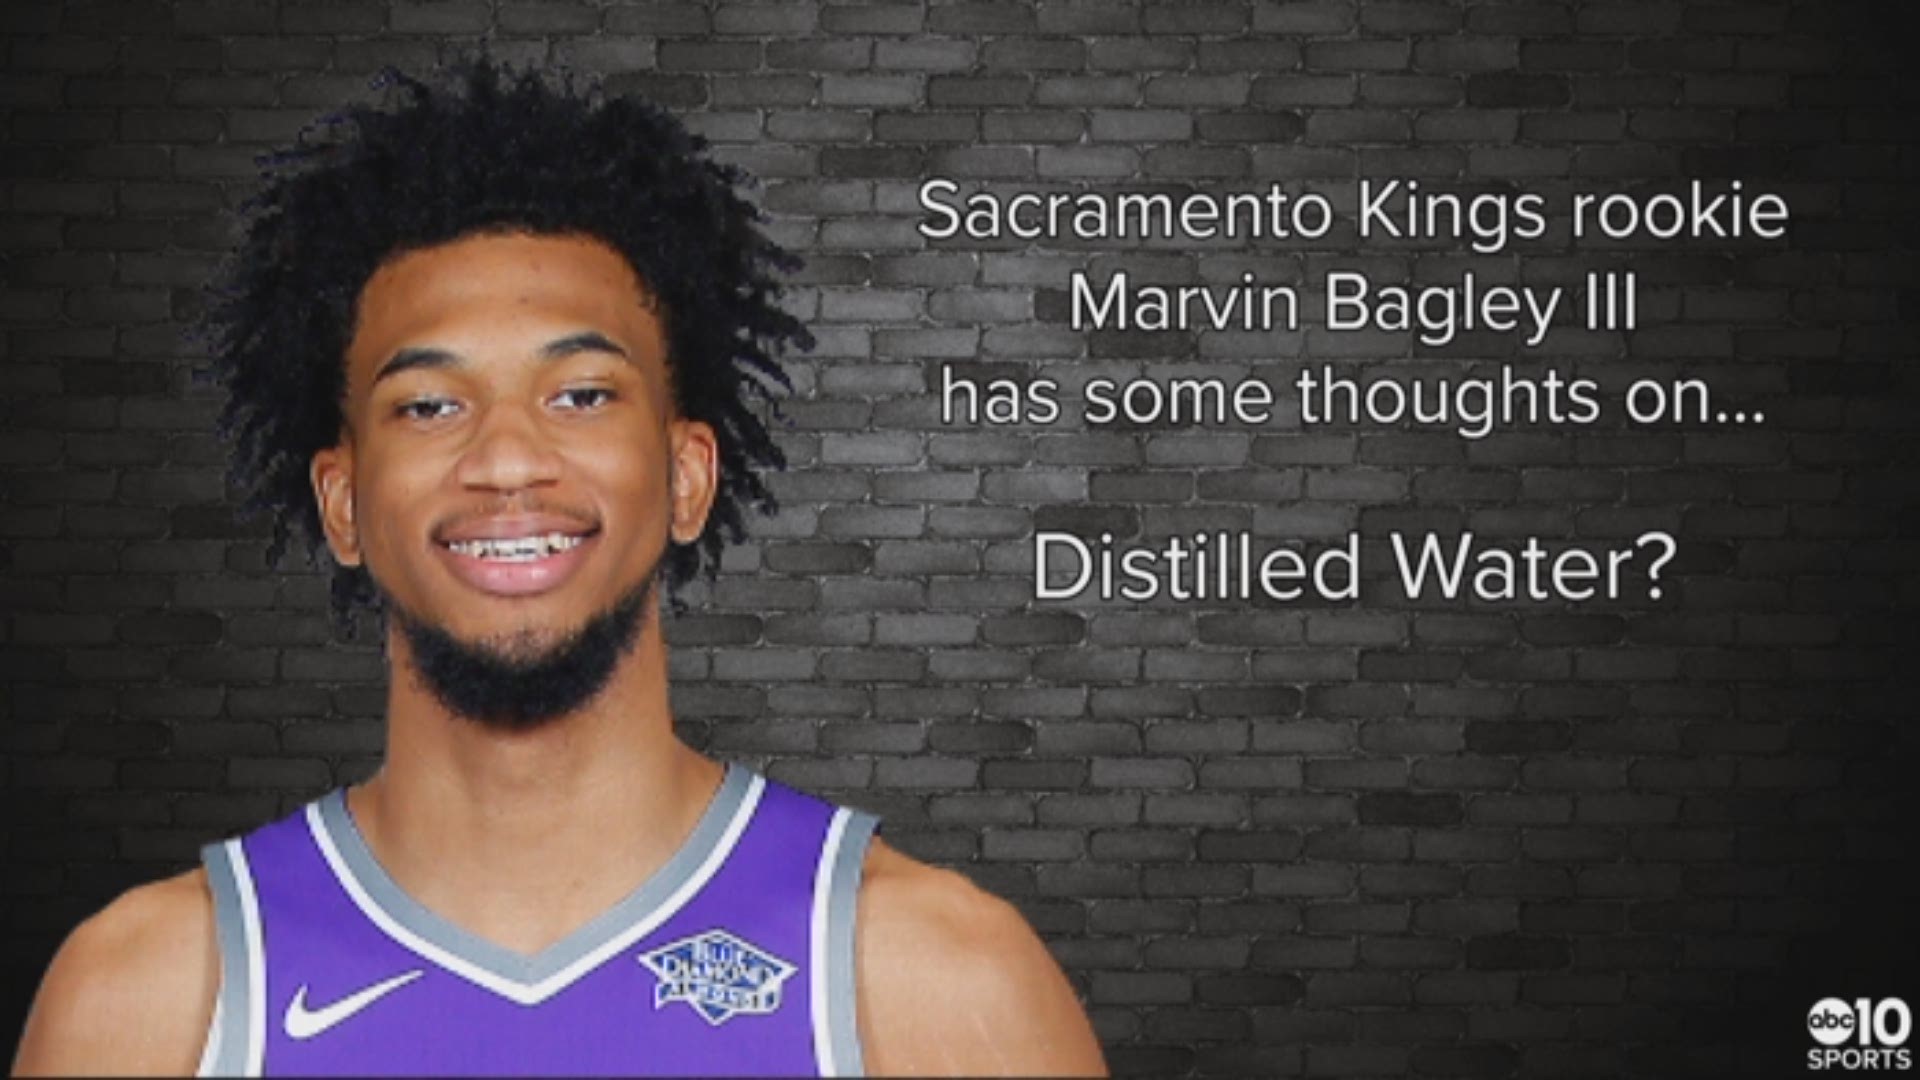 While on a holiday shopping spree at Raley's with families selected by the Sacramento Food Bank, Kings rookie Marvin Bagley III let his thoughts be known about distilled water. Also making an appearance are his teammates Iman Shumpert and Frank Mason III.